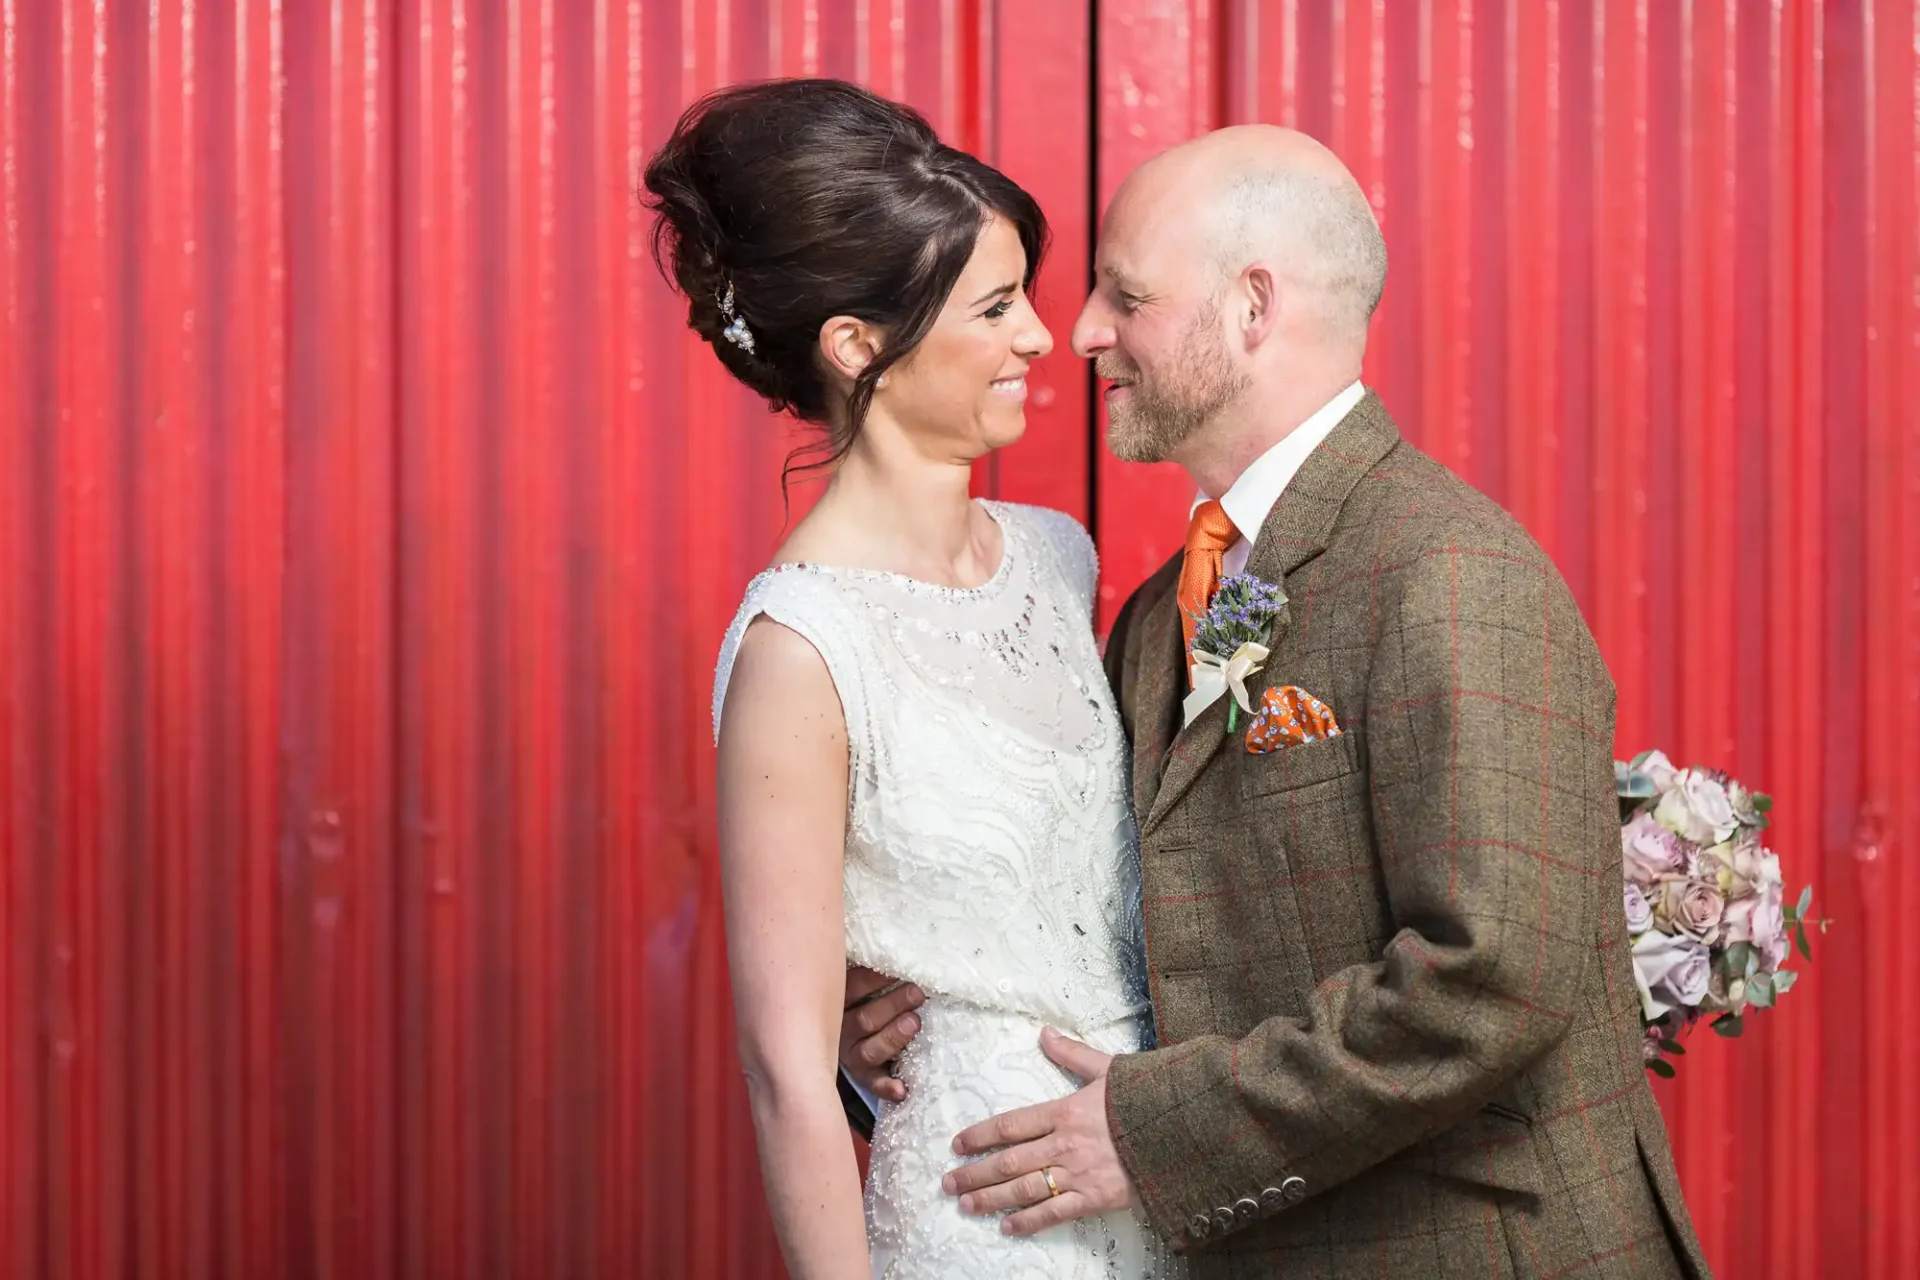 A bride and groom smiling at each other, the bride in a white dress and the groom in a tweed suit, against a red corrugated metal background.